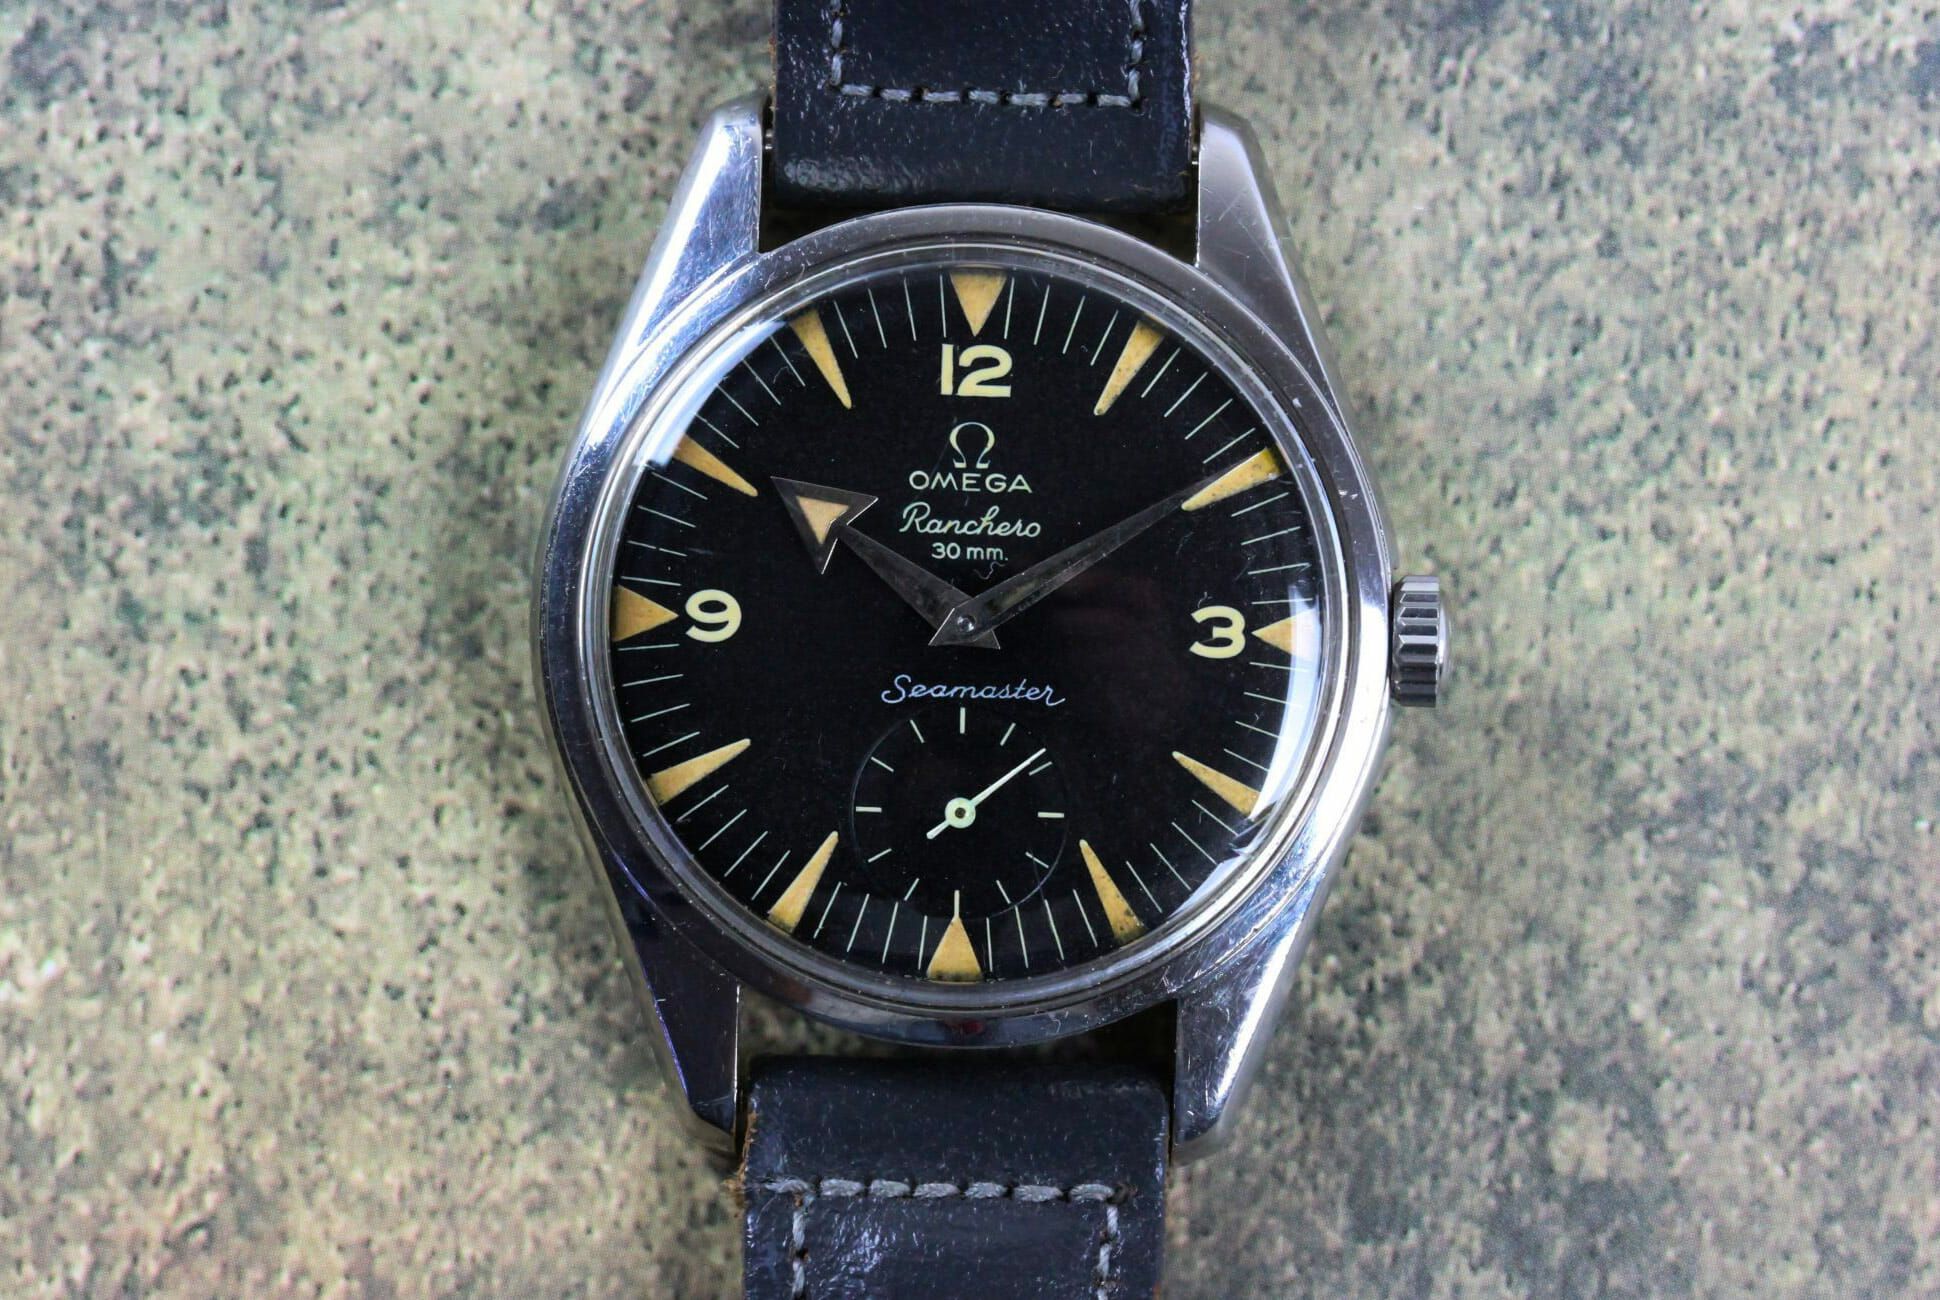 The Omega Ranchero Was a Handsome Watch 